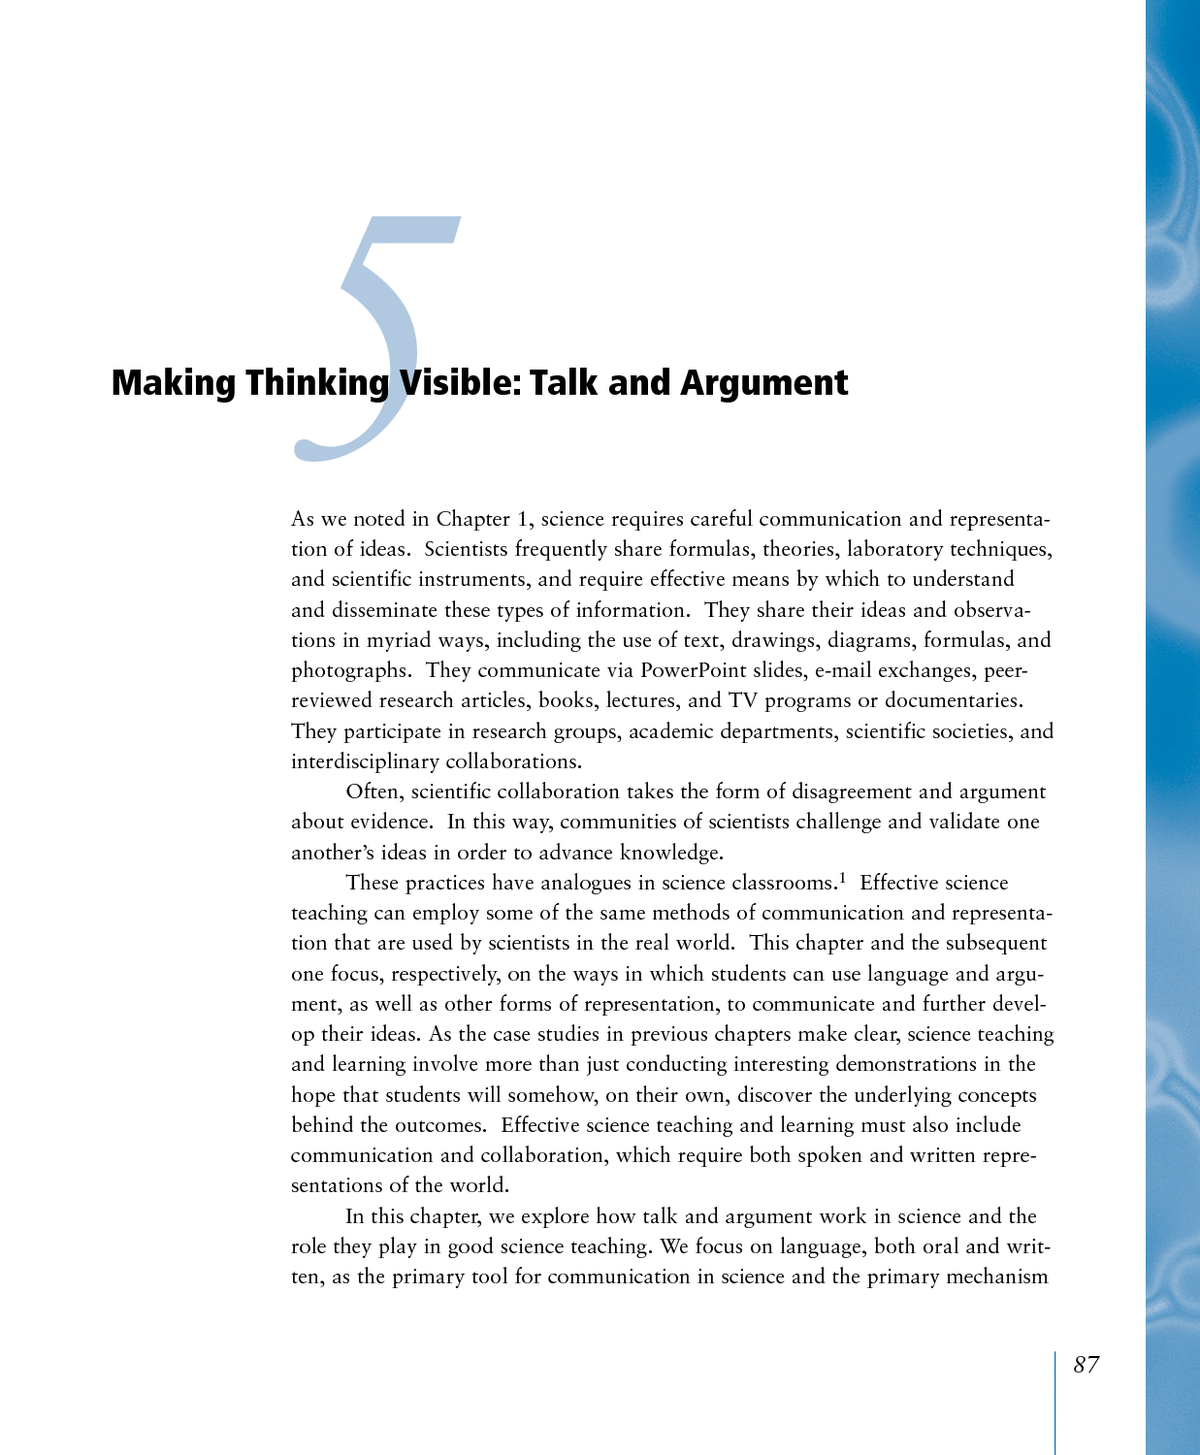 Developing a coherent argument throughout a book or dissertation